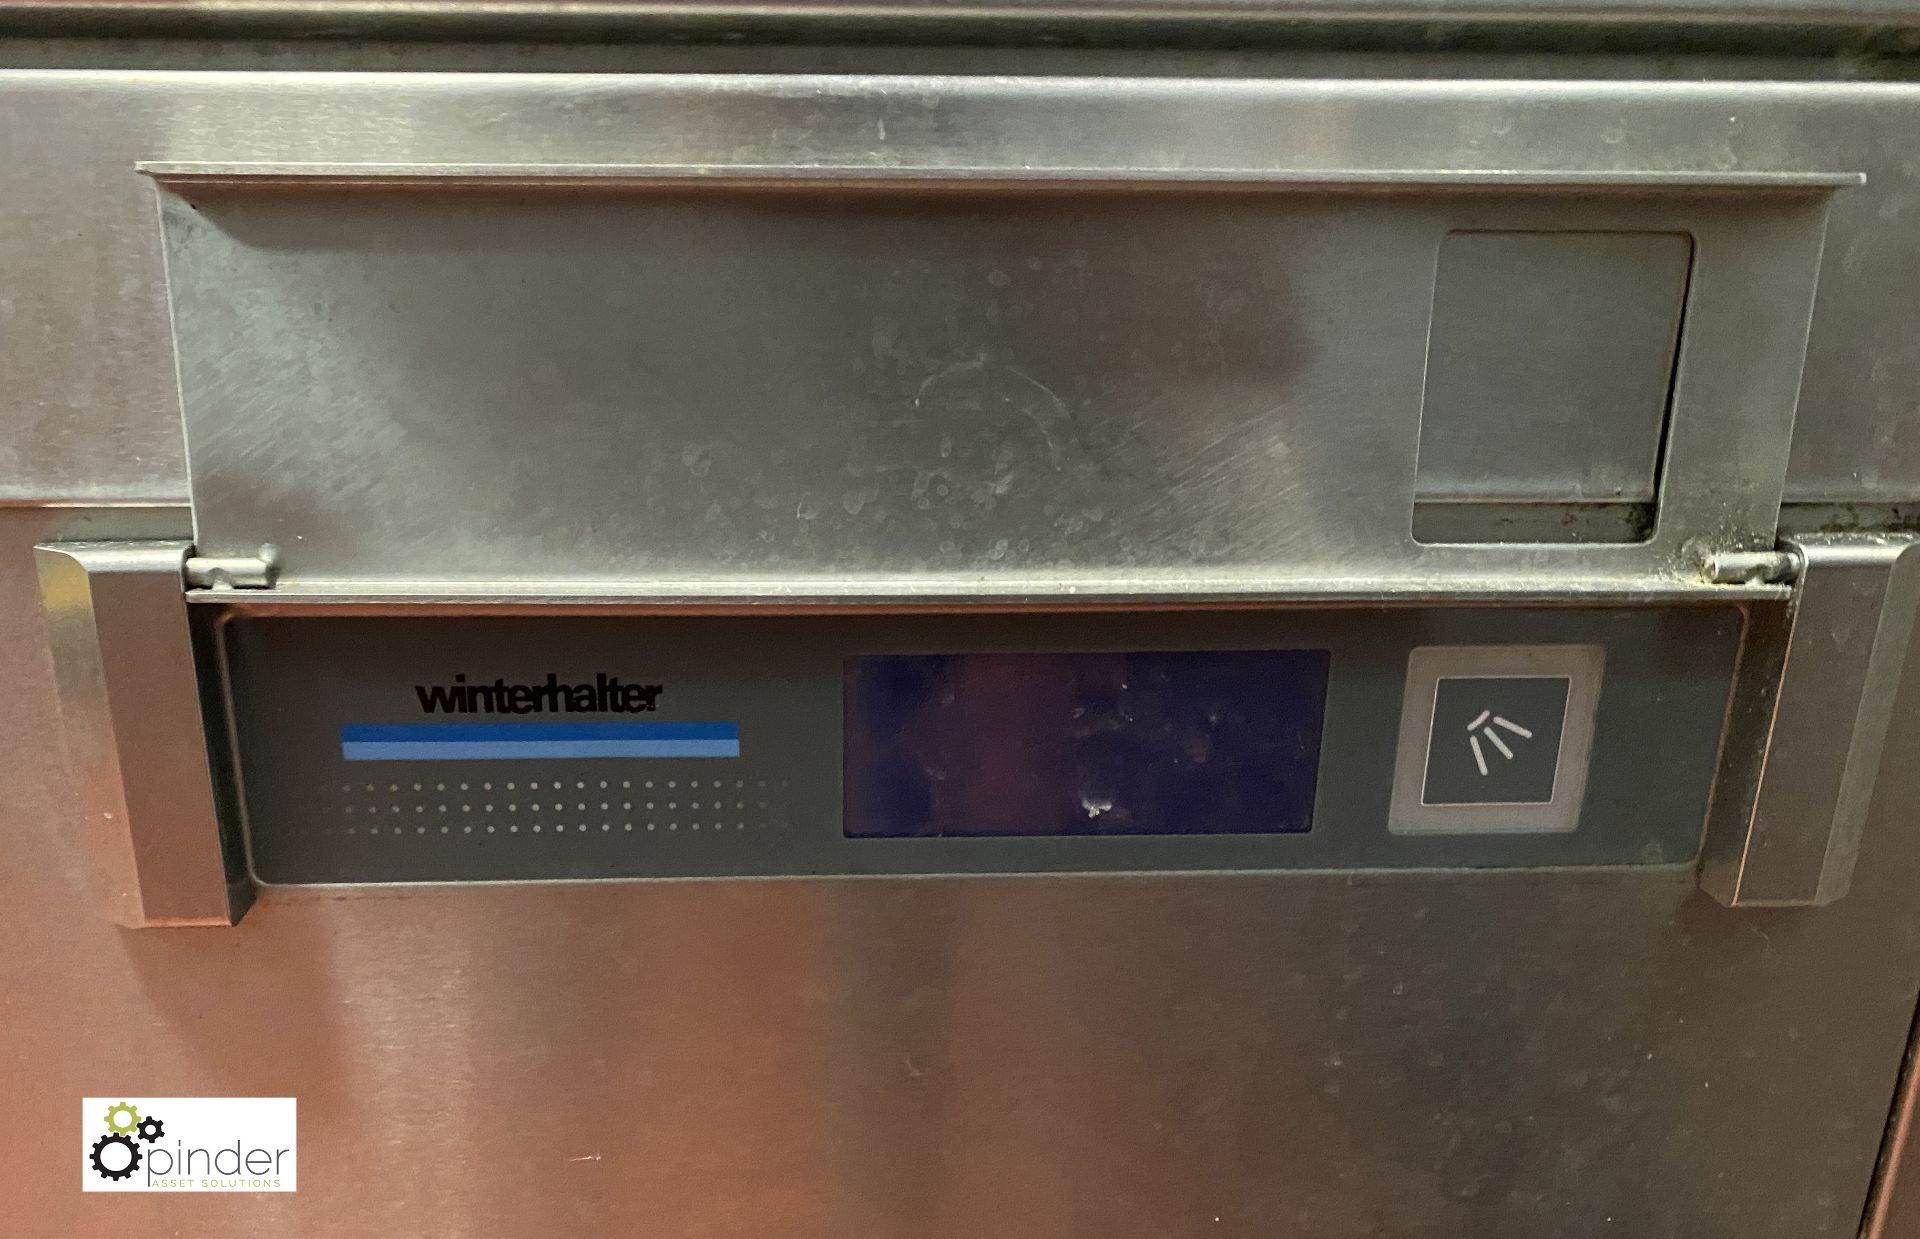 Winterhalter UFXL Commercial Dishwasher, 415volts, 1470mm x 880mm x 2060mm (lot location – - Image 5 of 6